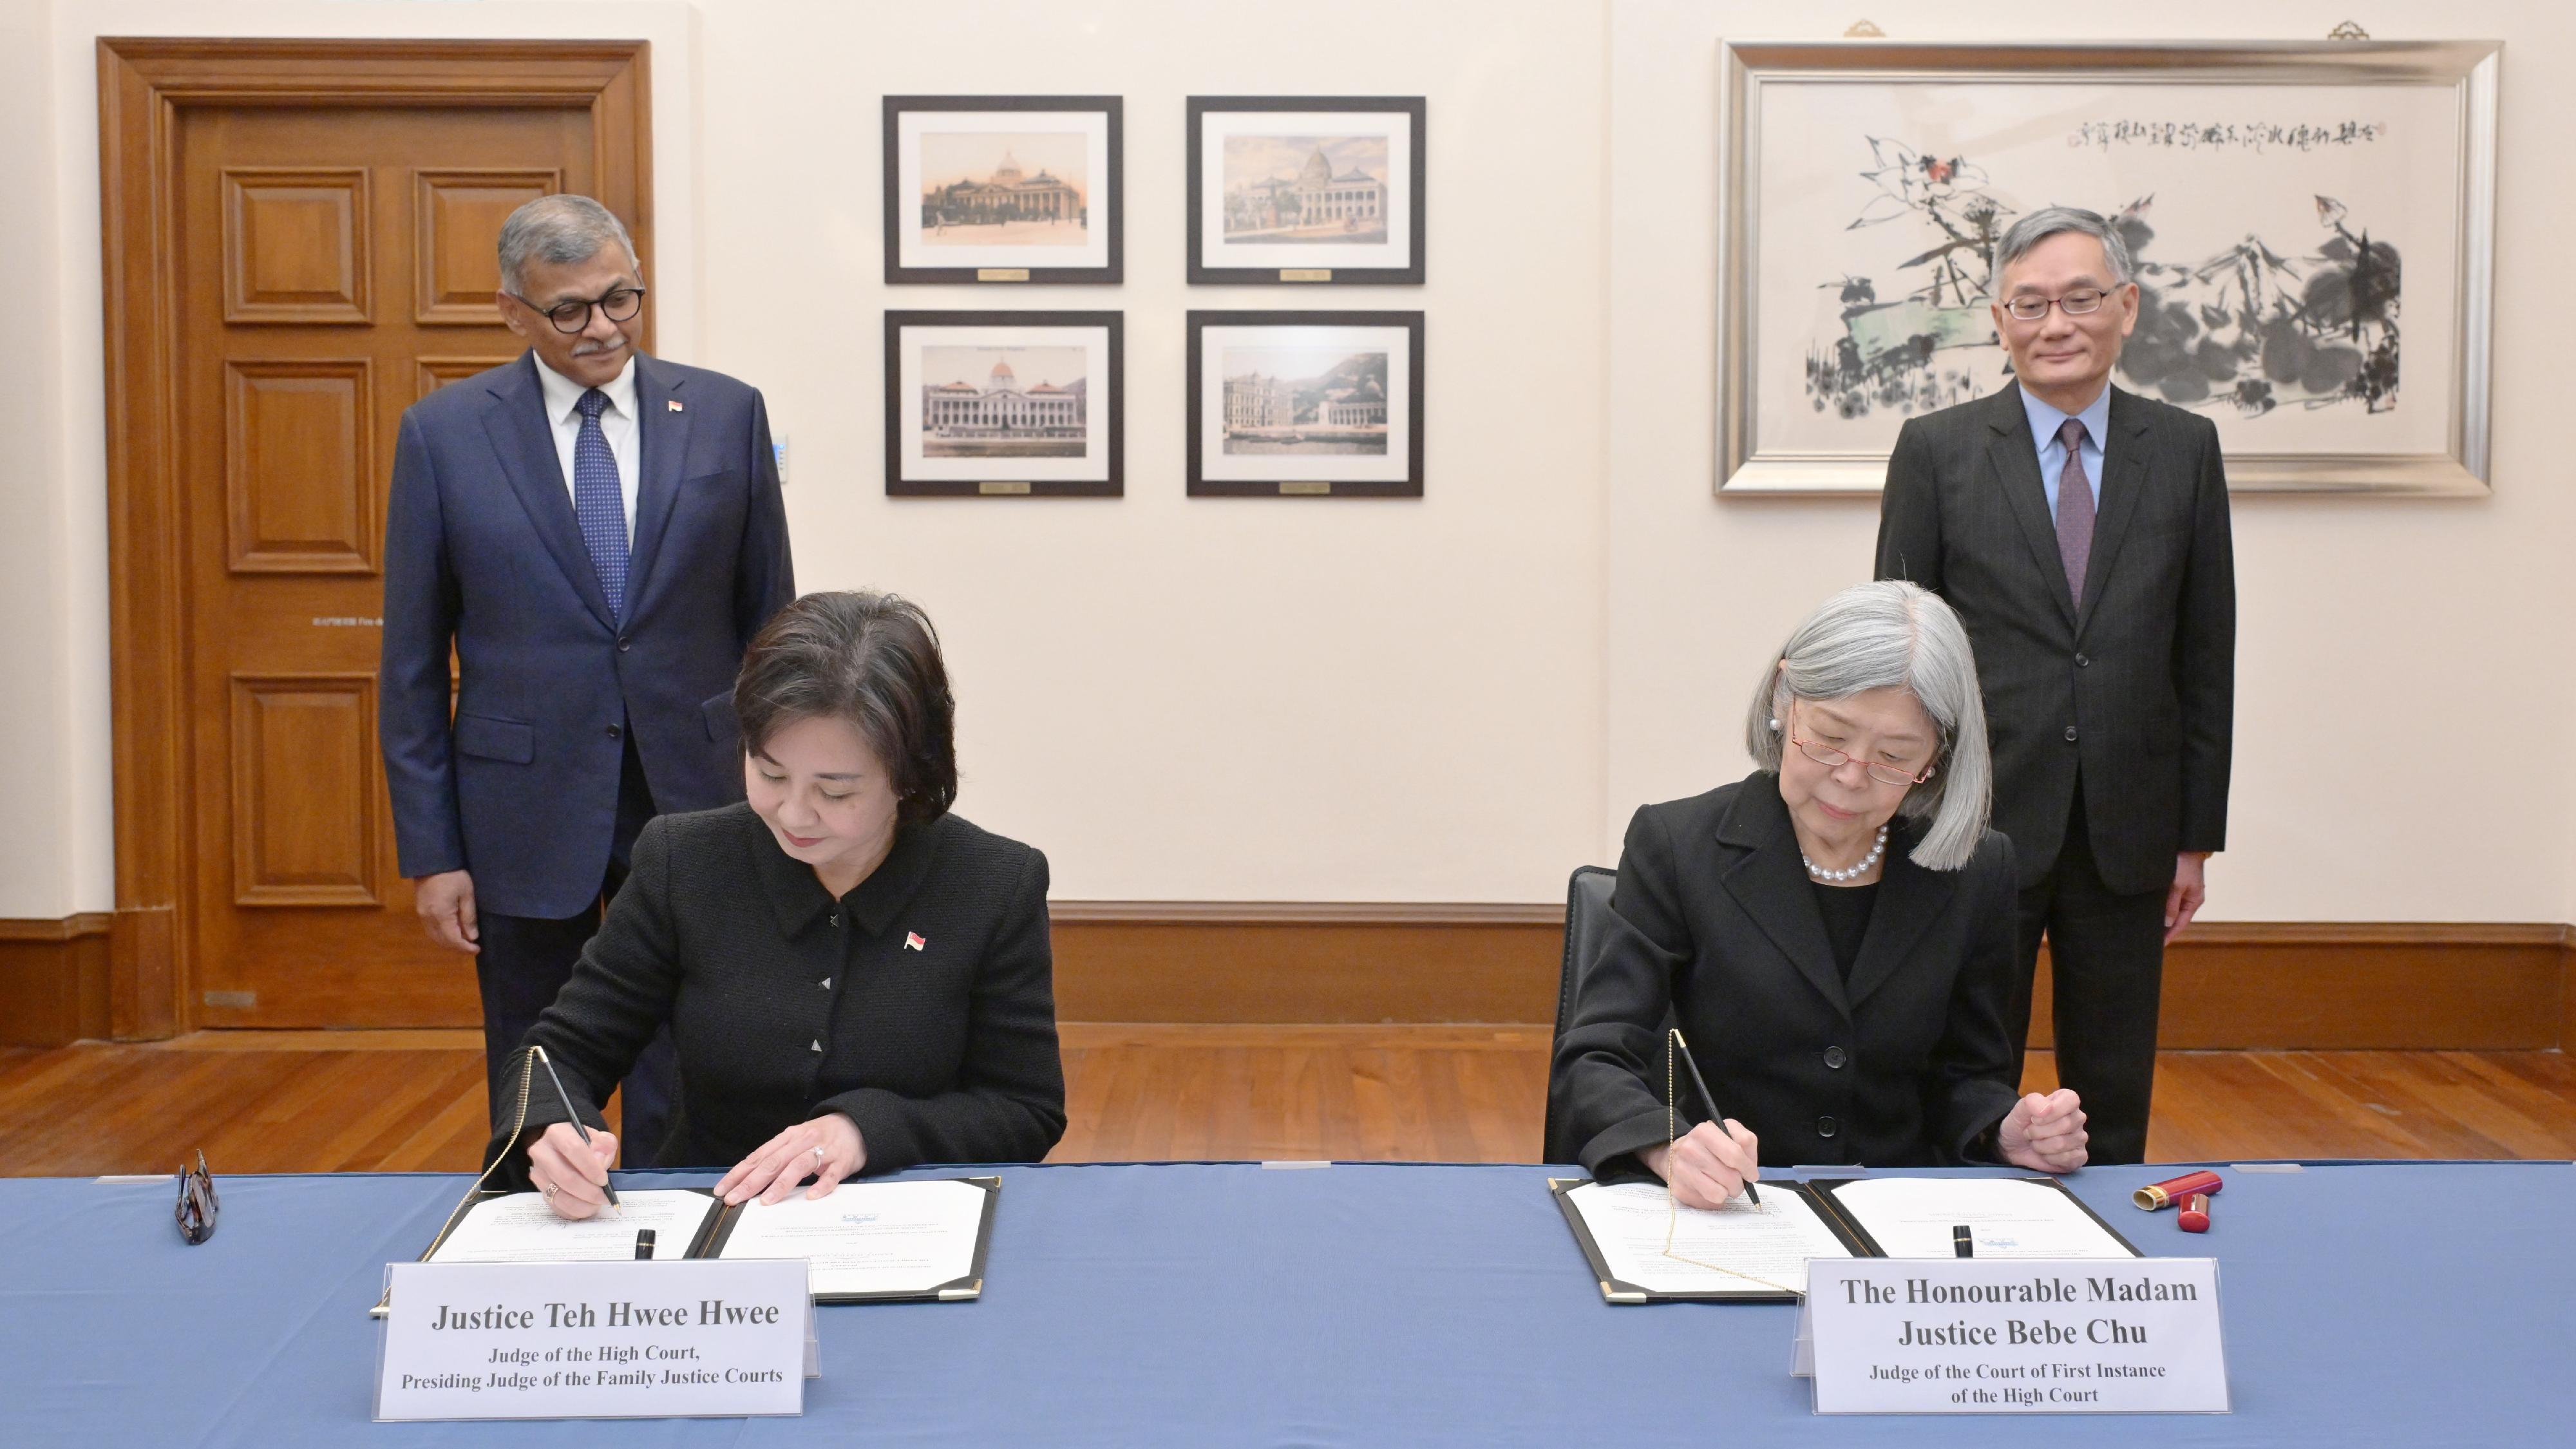 The Honourable Chief Justice Andrew Cheung Kui-nung (back row, right), Chief Justice of the Court of Final Appeal of the Hong Kong Special Administrative Region (HKSAR), and The Honourable the Chief Justice Sundaresh Menon of Singapore (back row, left) witnessed the signing of the Memorandum of Understanding by Madam Justice Bebe Chu (front row, right), Judge of the Court of First Instance of the High Court of the HKSAR with special responsibility for family cases, and Justice Teh Hwee Hwee (front row, left), Judge of the High Court and Presiding Judge of the Family Justice Courts of Singapore, today (March 15) to promote the efficient administration of the family justice systems in the two jurisdictions.   